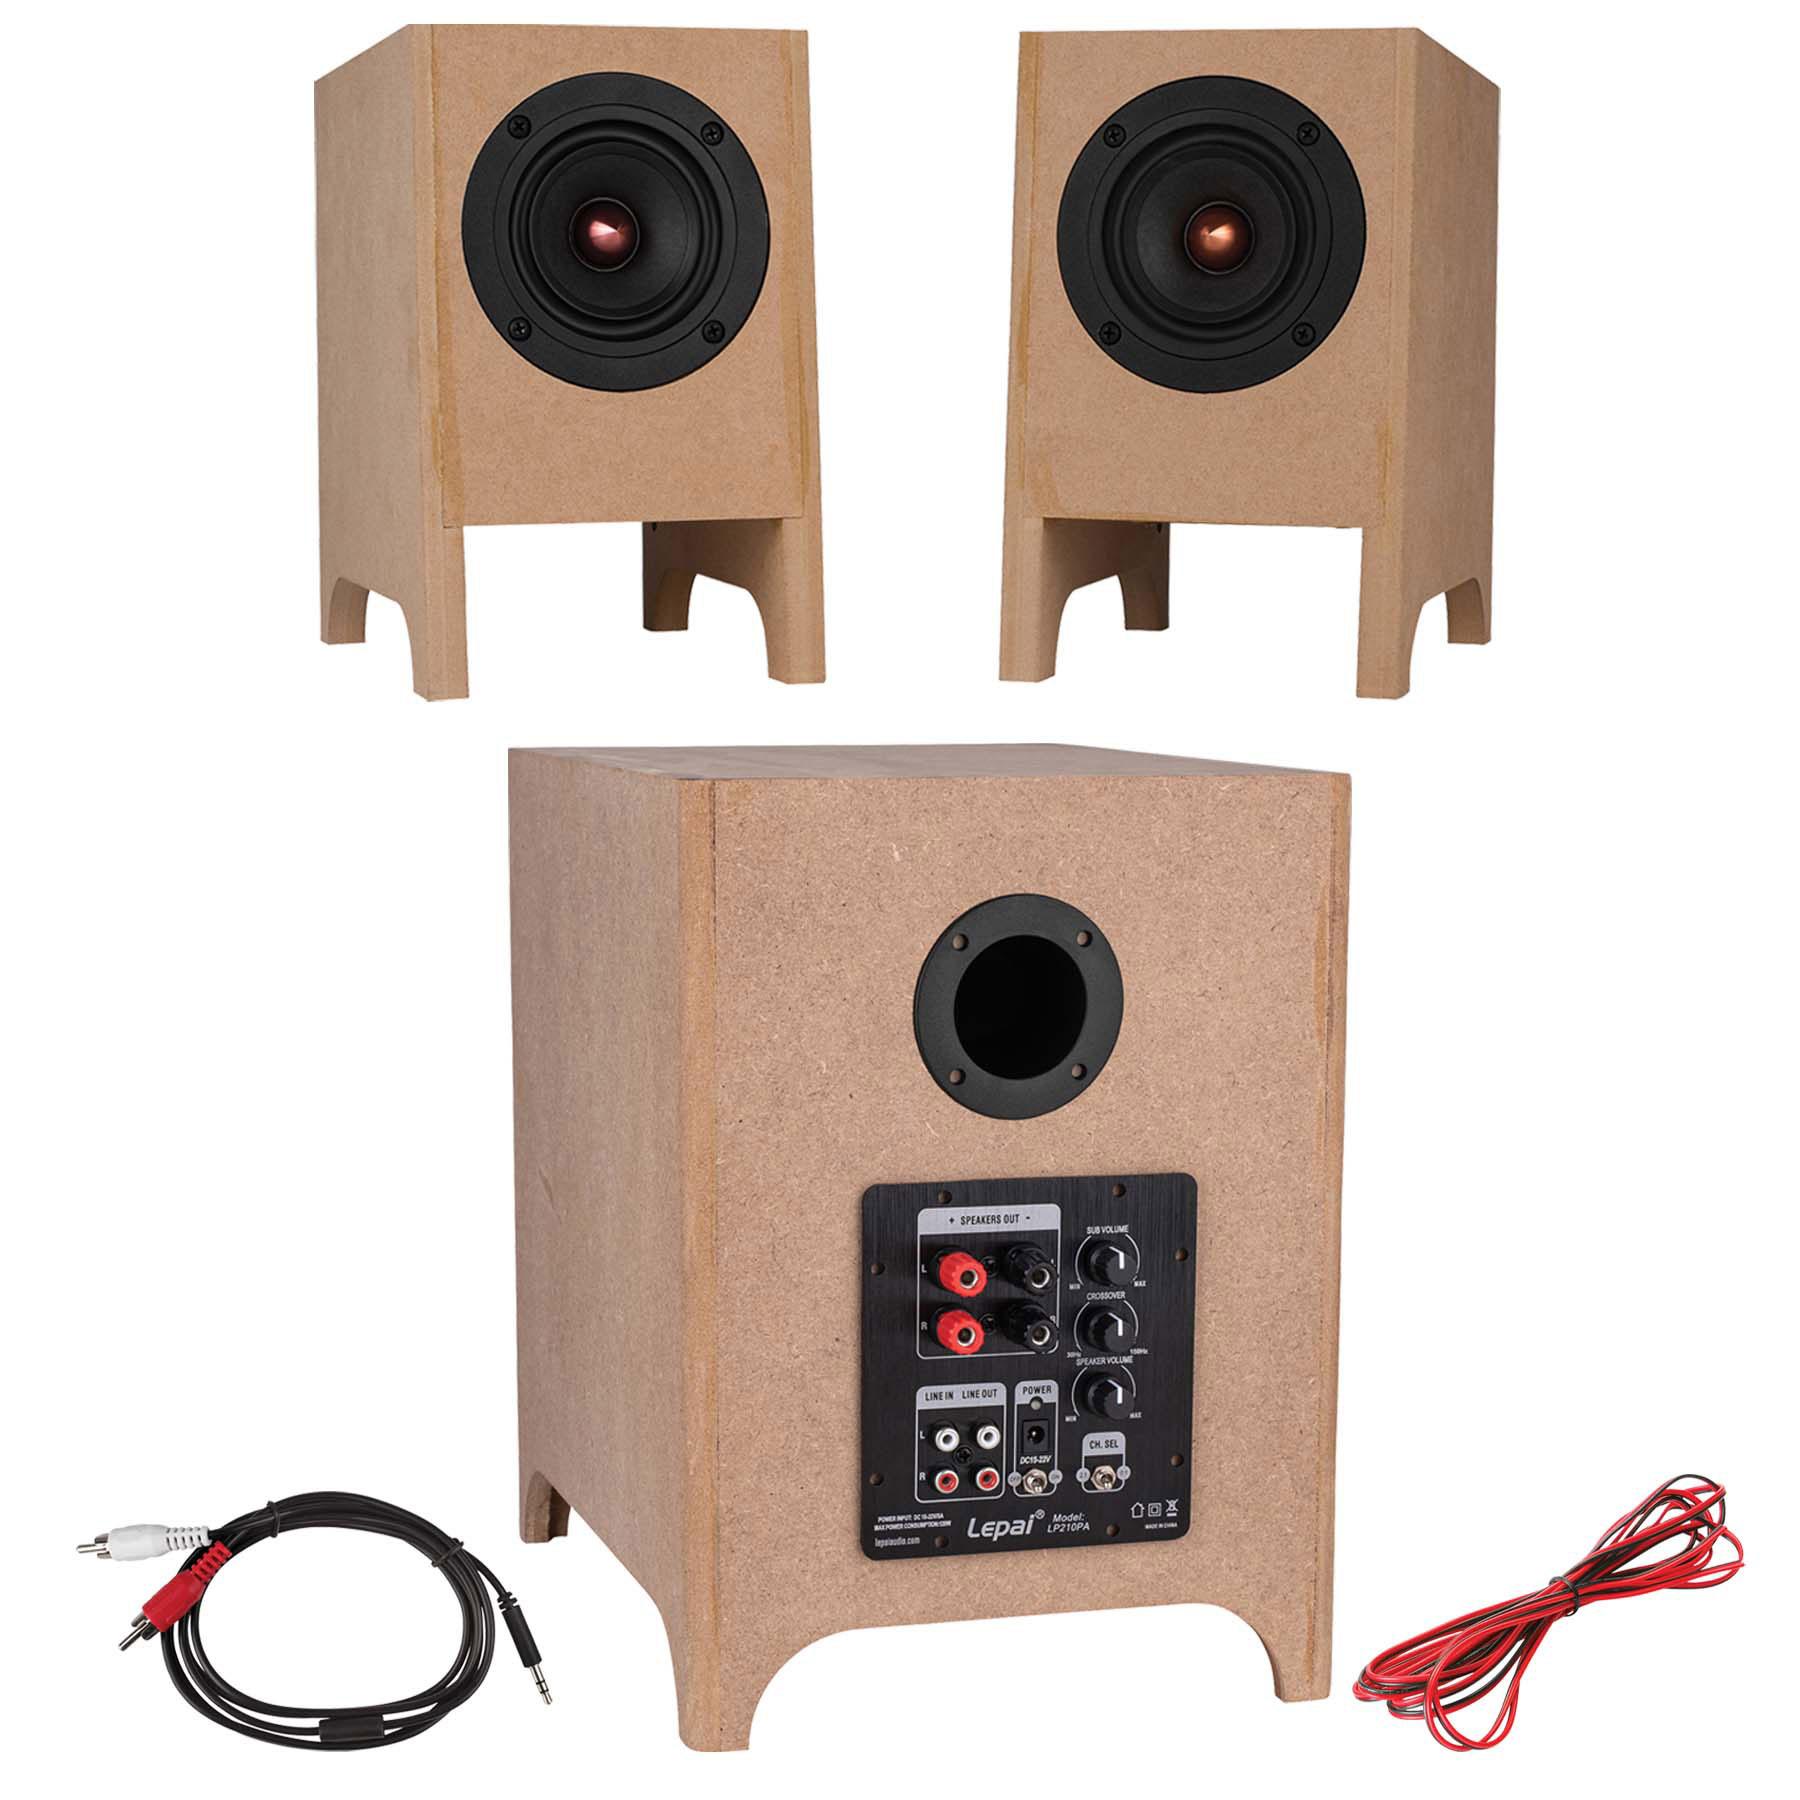 Copperhead with Subwoofer 2.1 Channel Desktop System